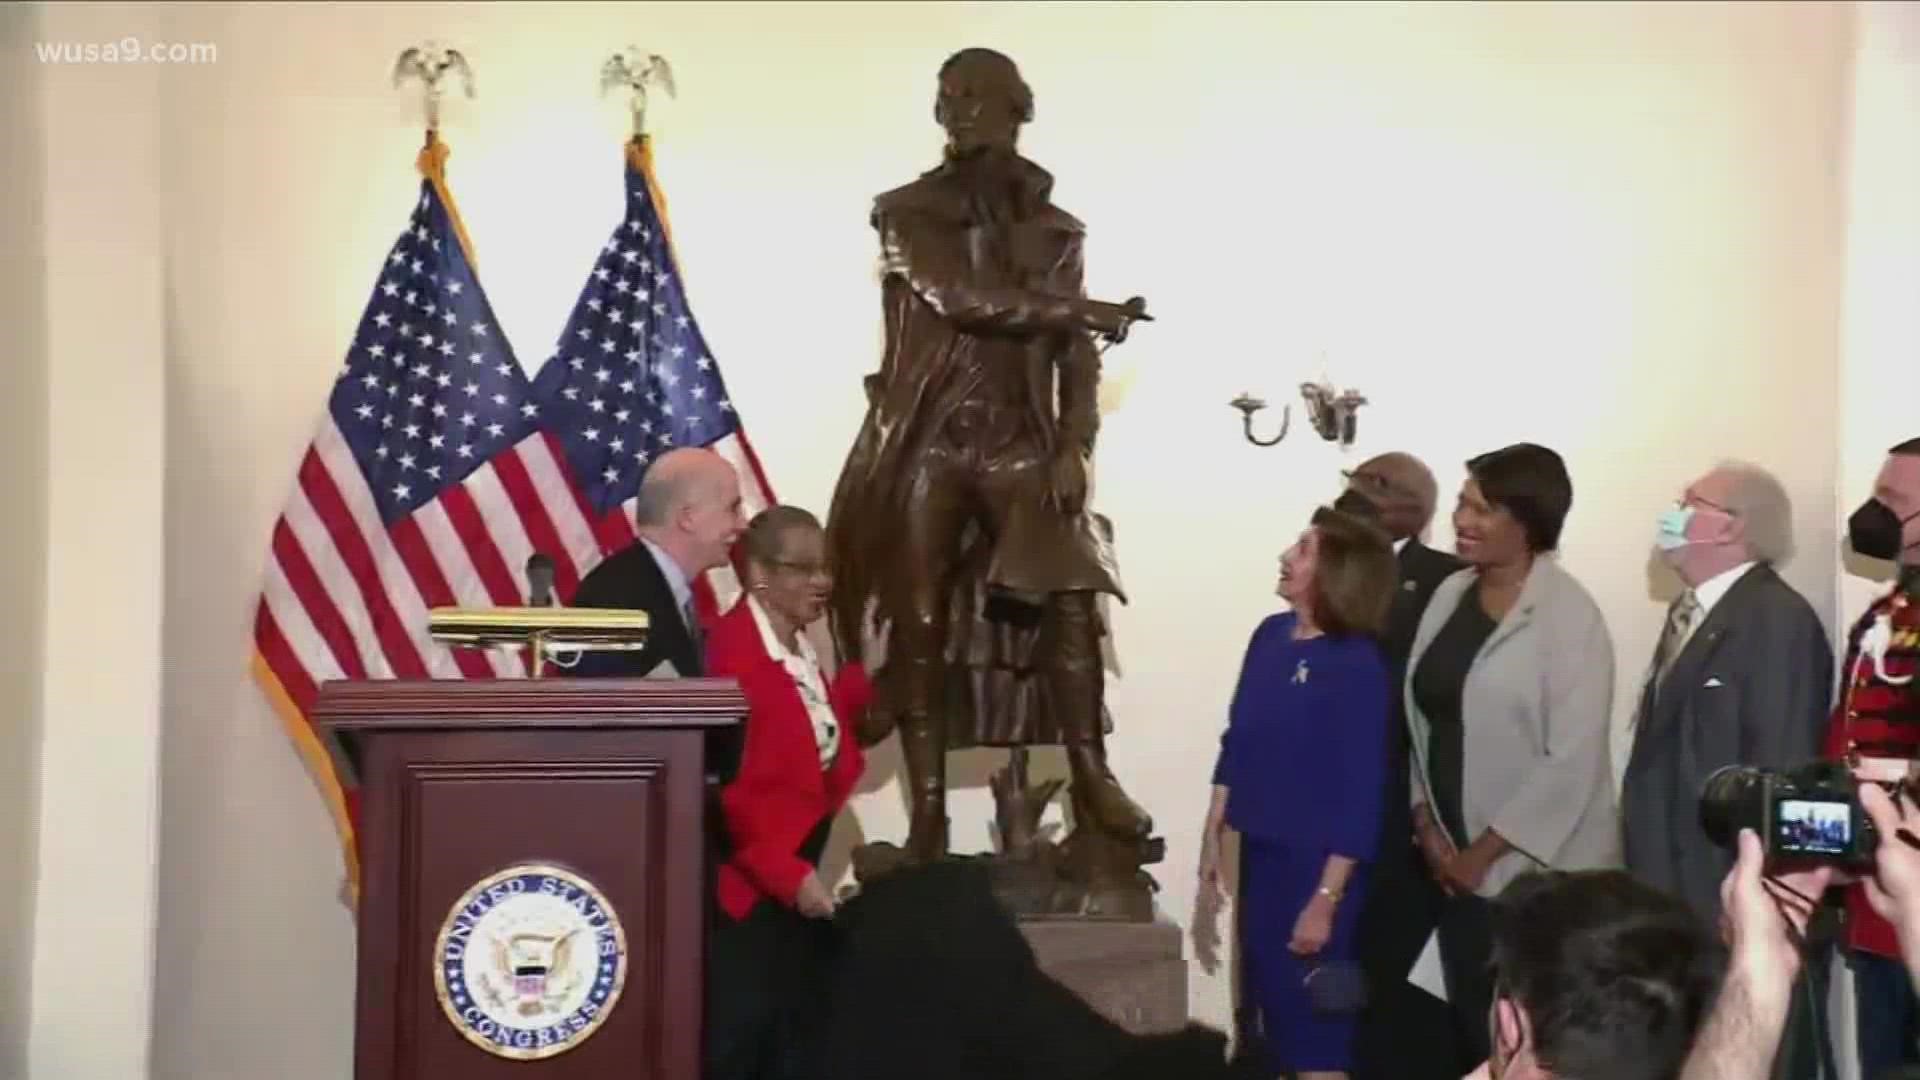 House Speaker Nancy Pelosi, Del Eleanor Holmes Norton, Mayor Muriel Bowser and other speak at the unveiling of a new statue of Pierre L'Enfant at the Capitol.